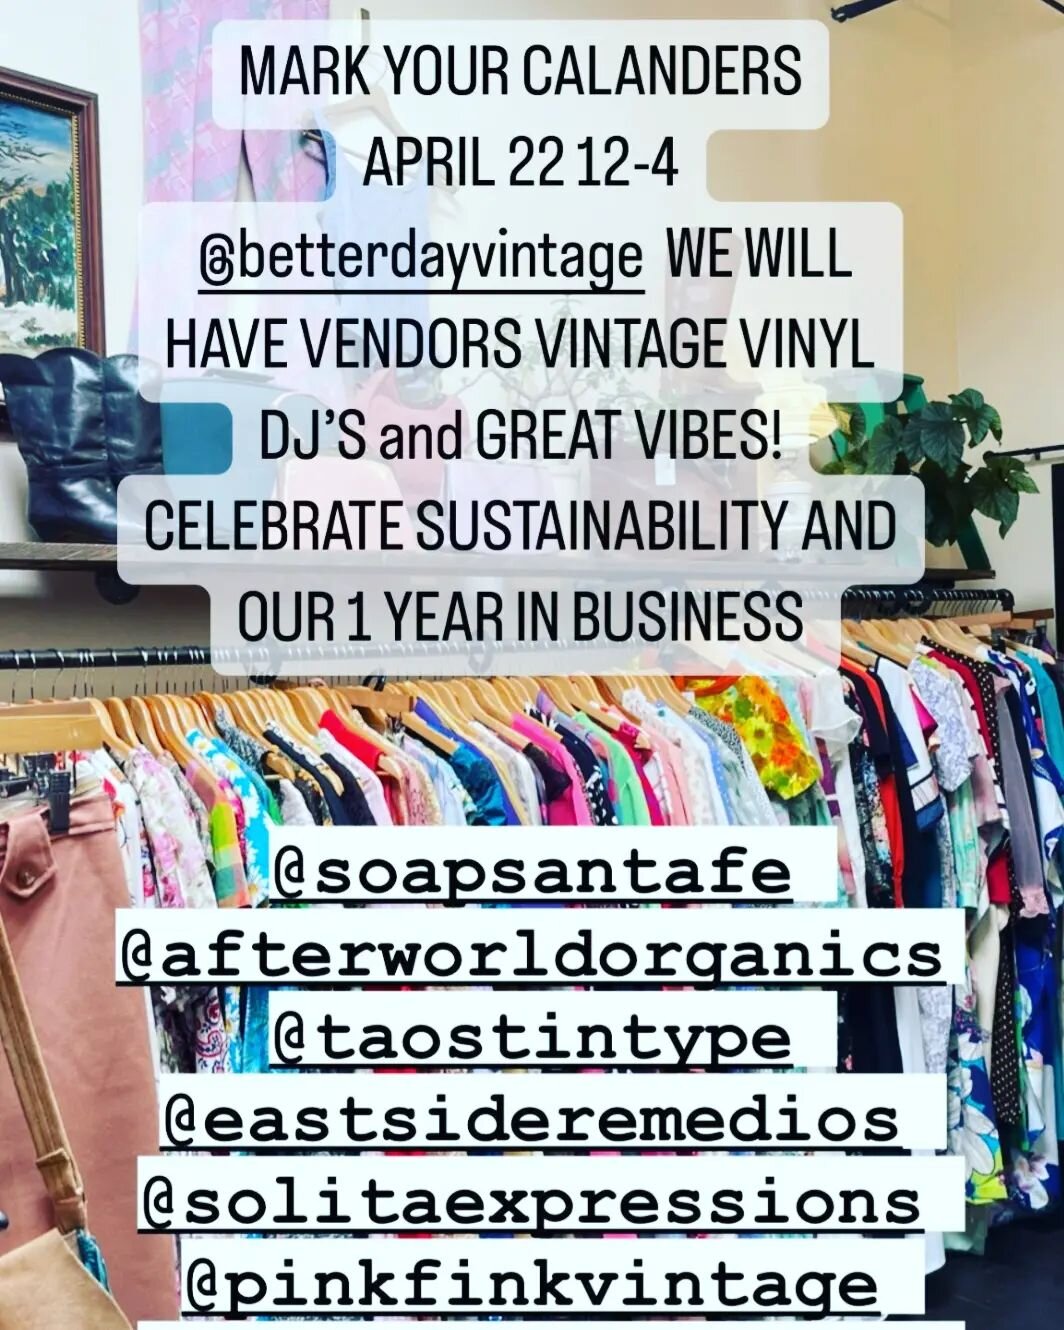 New Mexico friends,  join us at Betterday Vintage for thier Earth Day community pop-up! Lots of local vendors with used clothes, records, product re-fill stations, medicinal herbs, food and fun! Thanks Angela for inviting us! Ilocation: in front of t